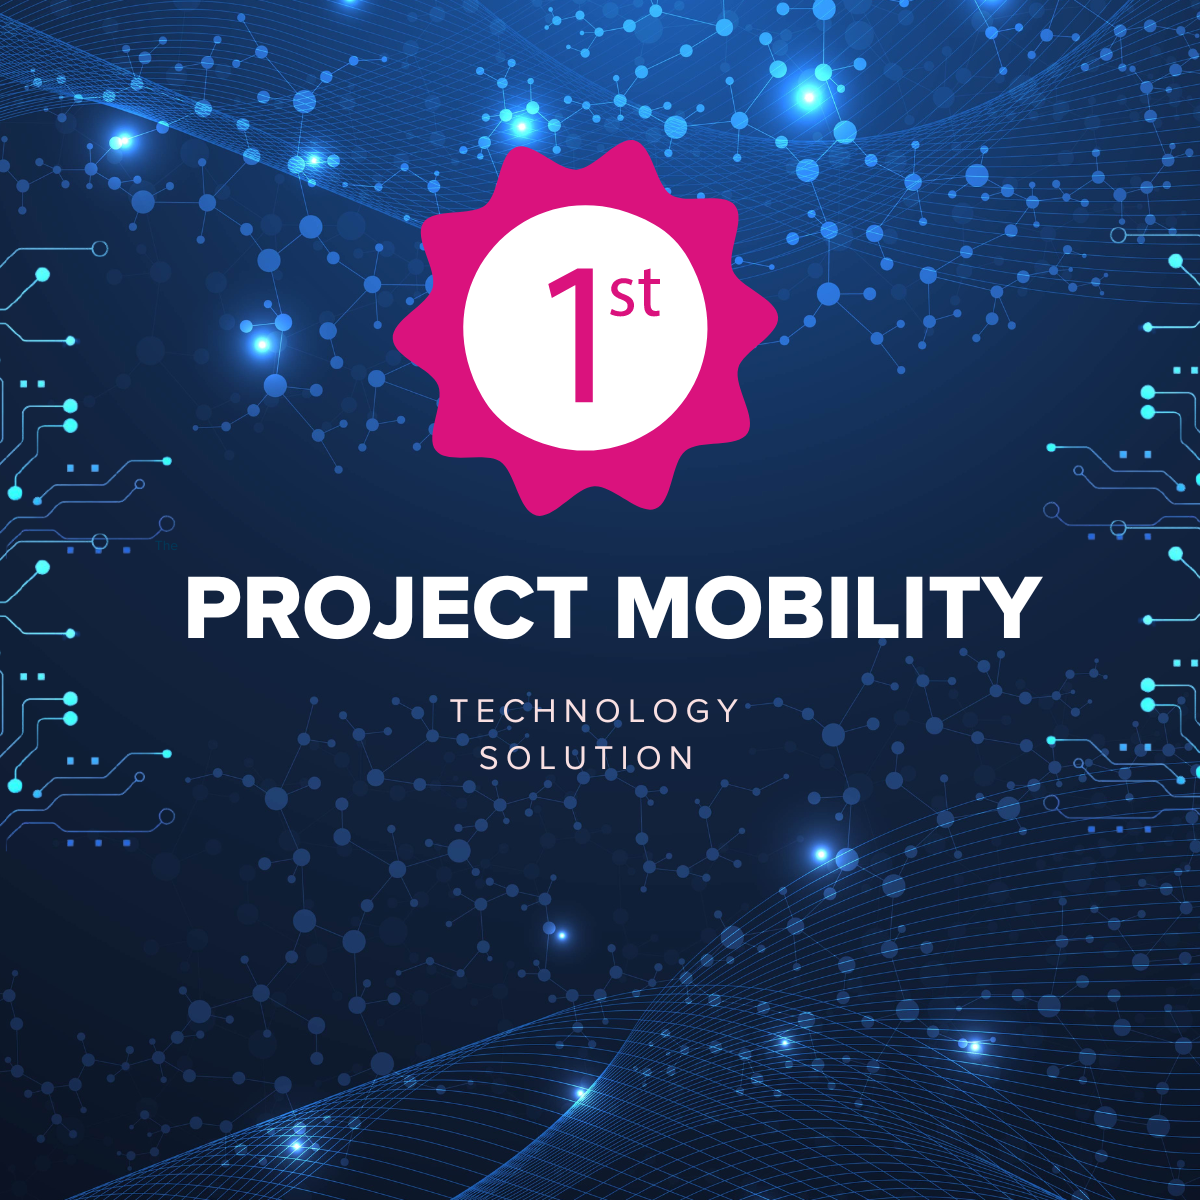 New! Game-Changing Project Mobility Technology Solution